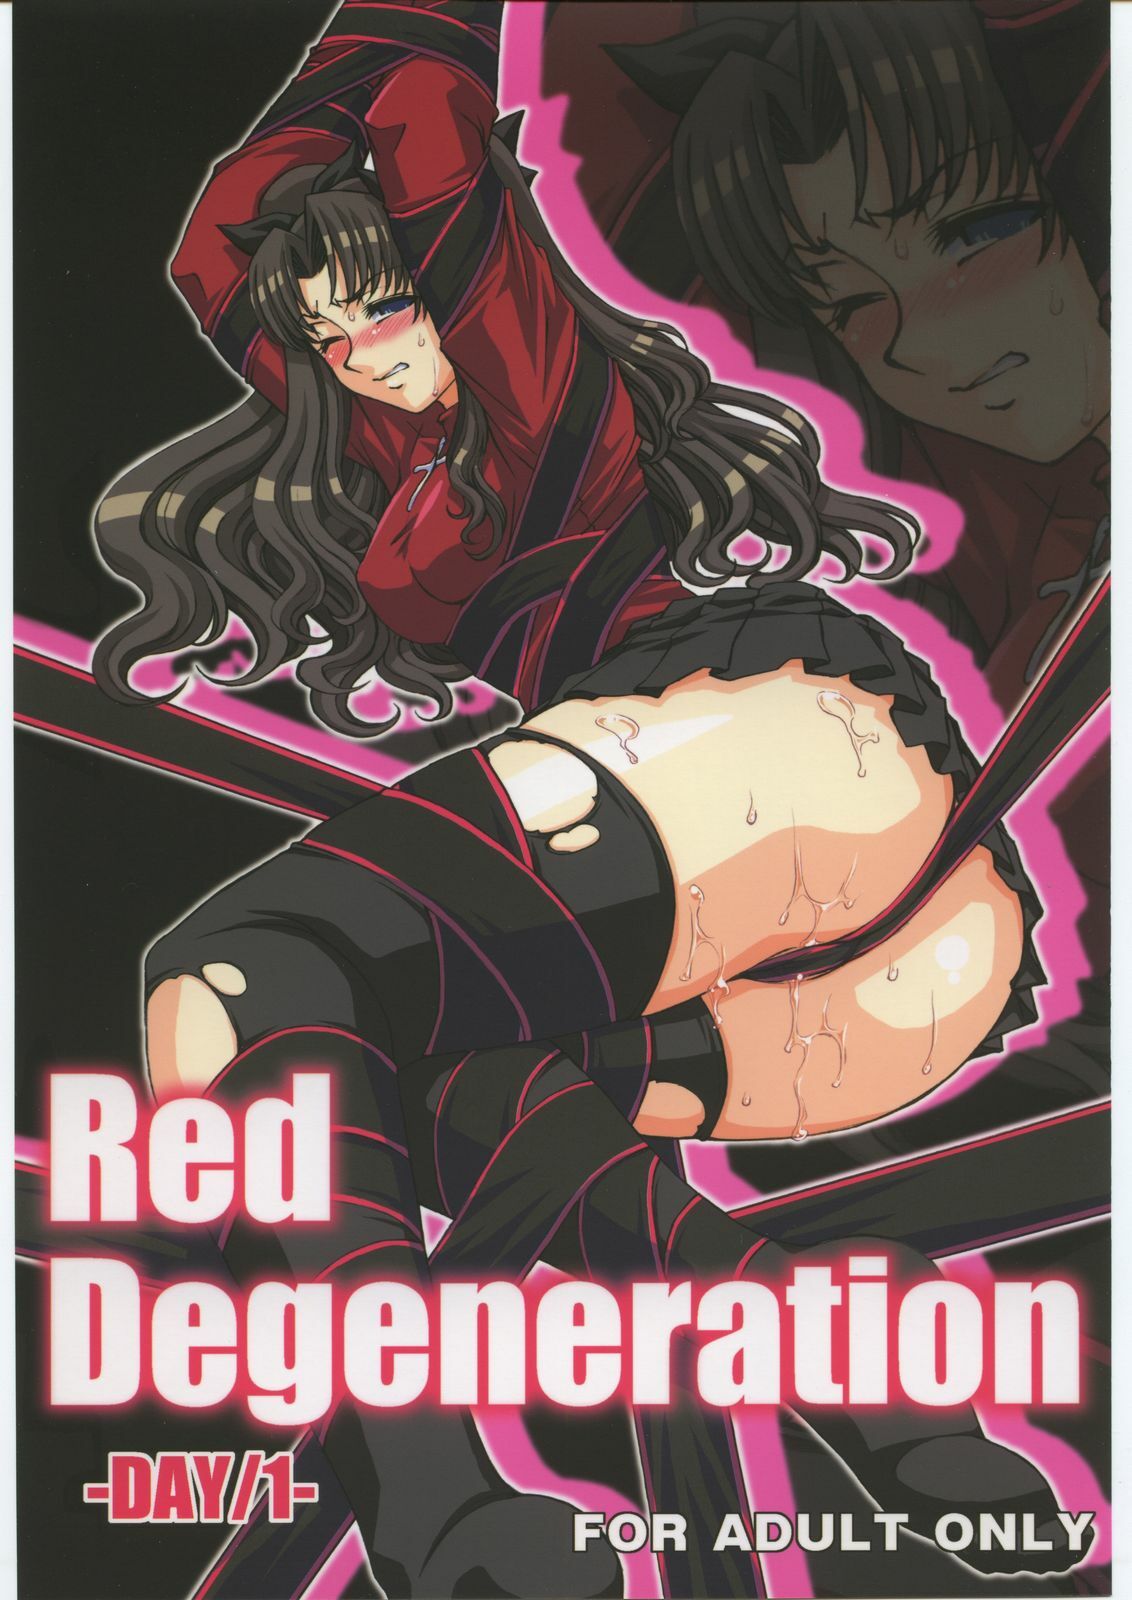 (SC33) [H.B (B-RIVER)] Red Degeneration -DAY/1- (Fate/stay night) page 1 full